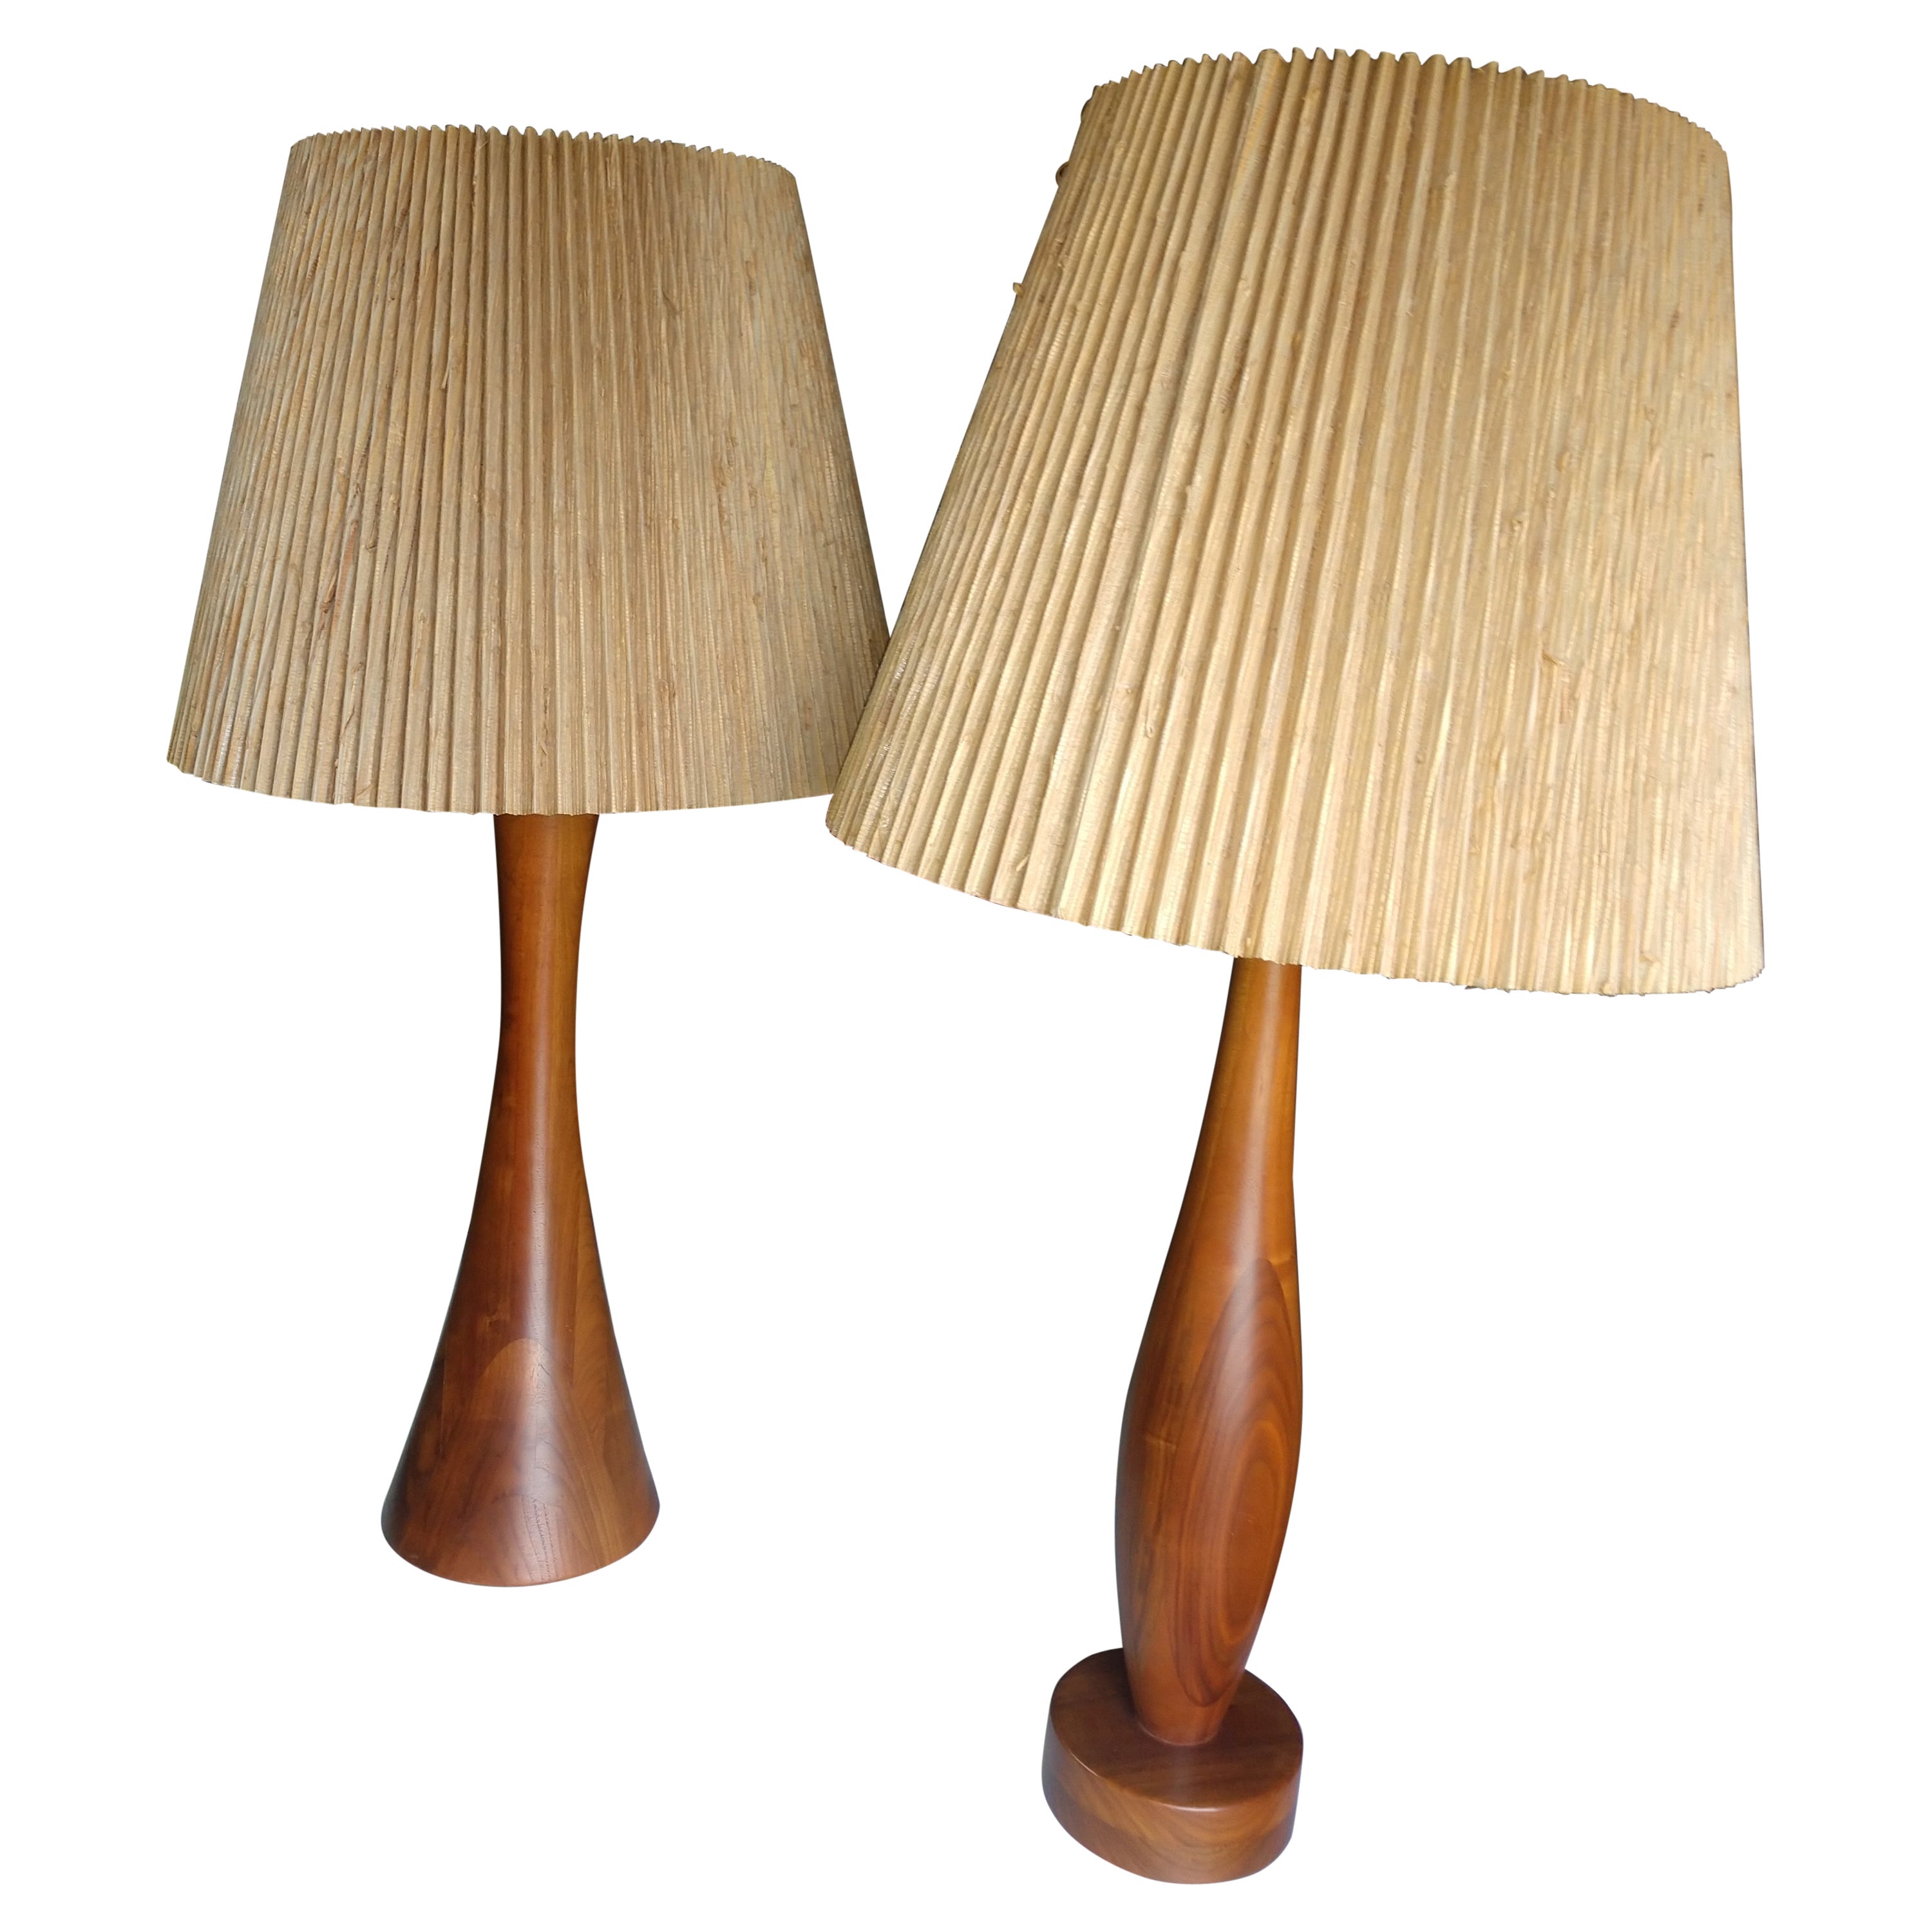 American MidCentury Modern Complimentary Pair Table Lamps Philip Lloyd Powell New Hope Pa For Sale